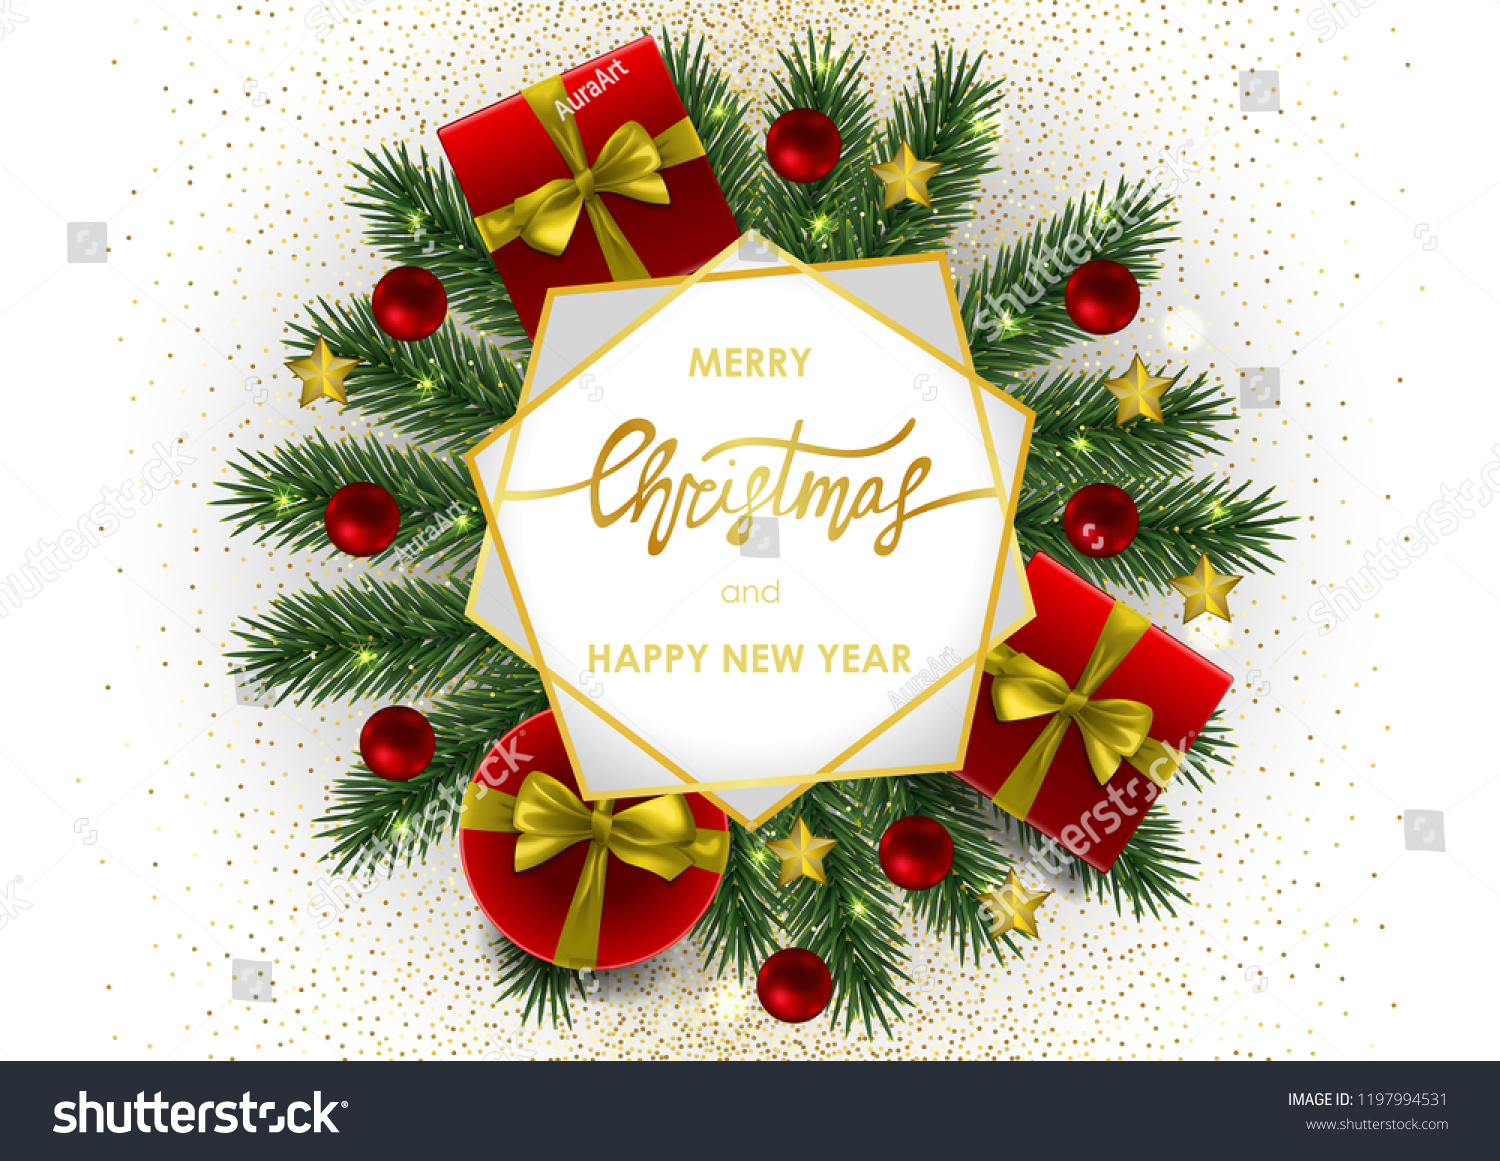 Merry Christmas and Happy New Year invitation card with gold geometric frame on white background. A4 template with fir tree template for greeting winter holiday cards, posters, covers with text place. #1197994531